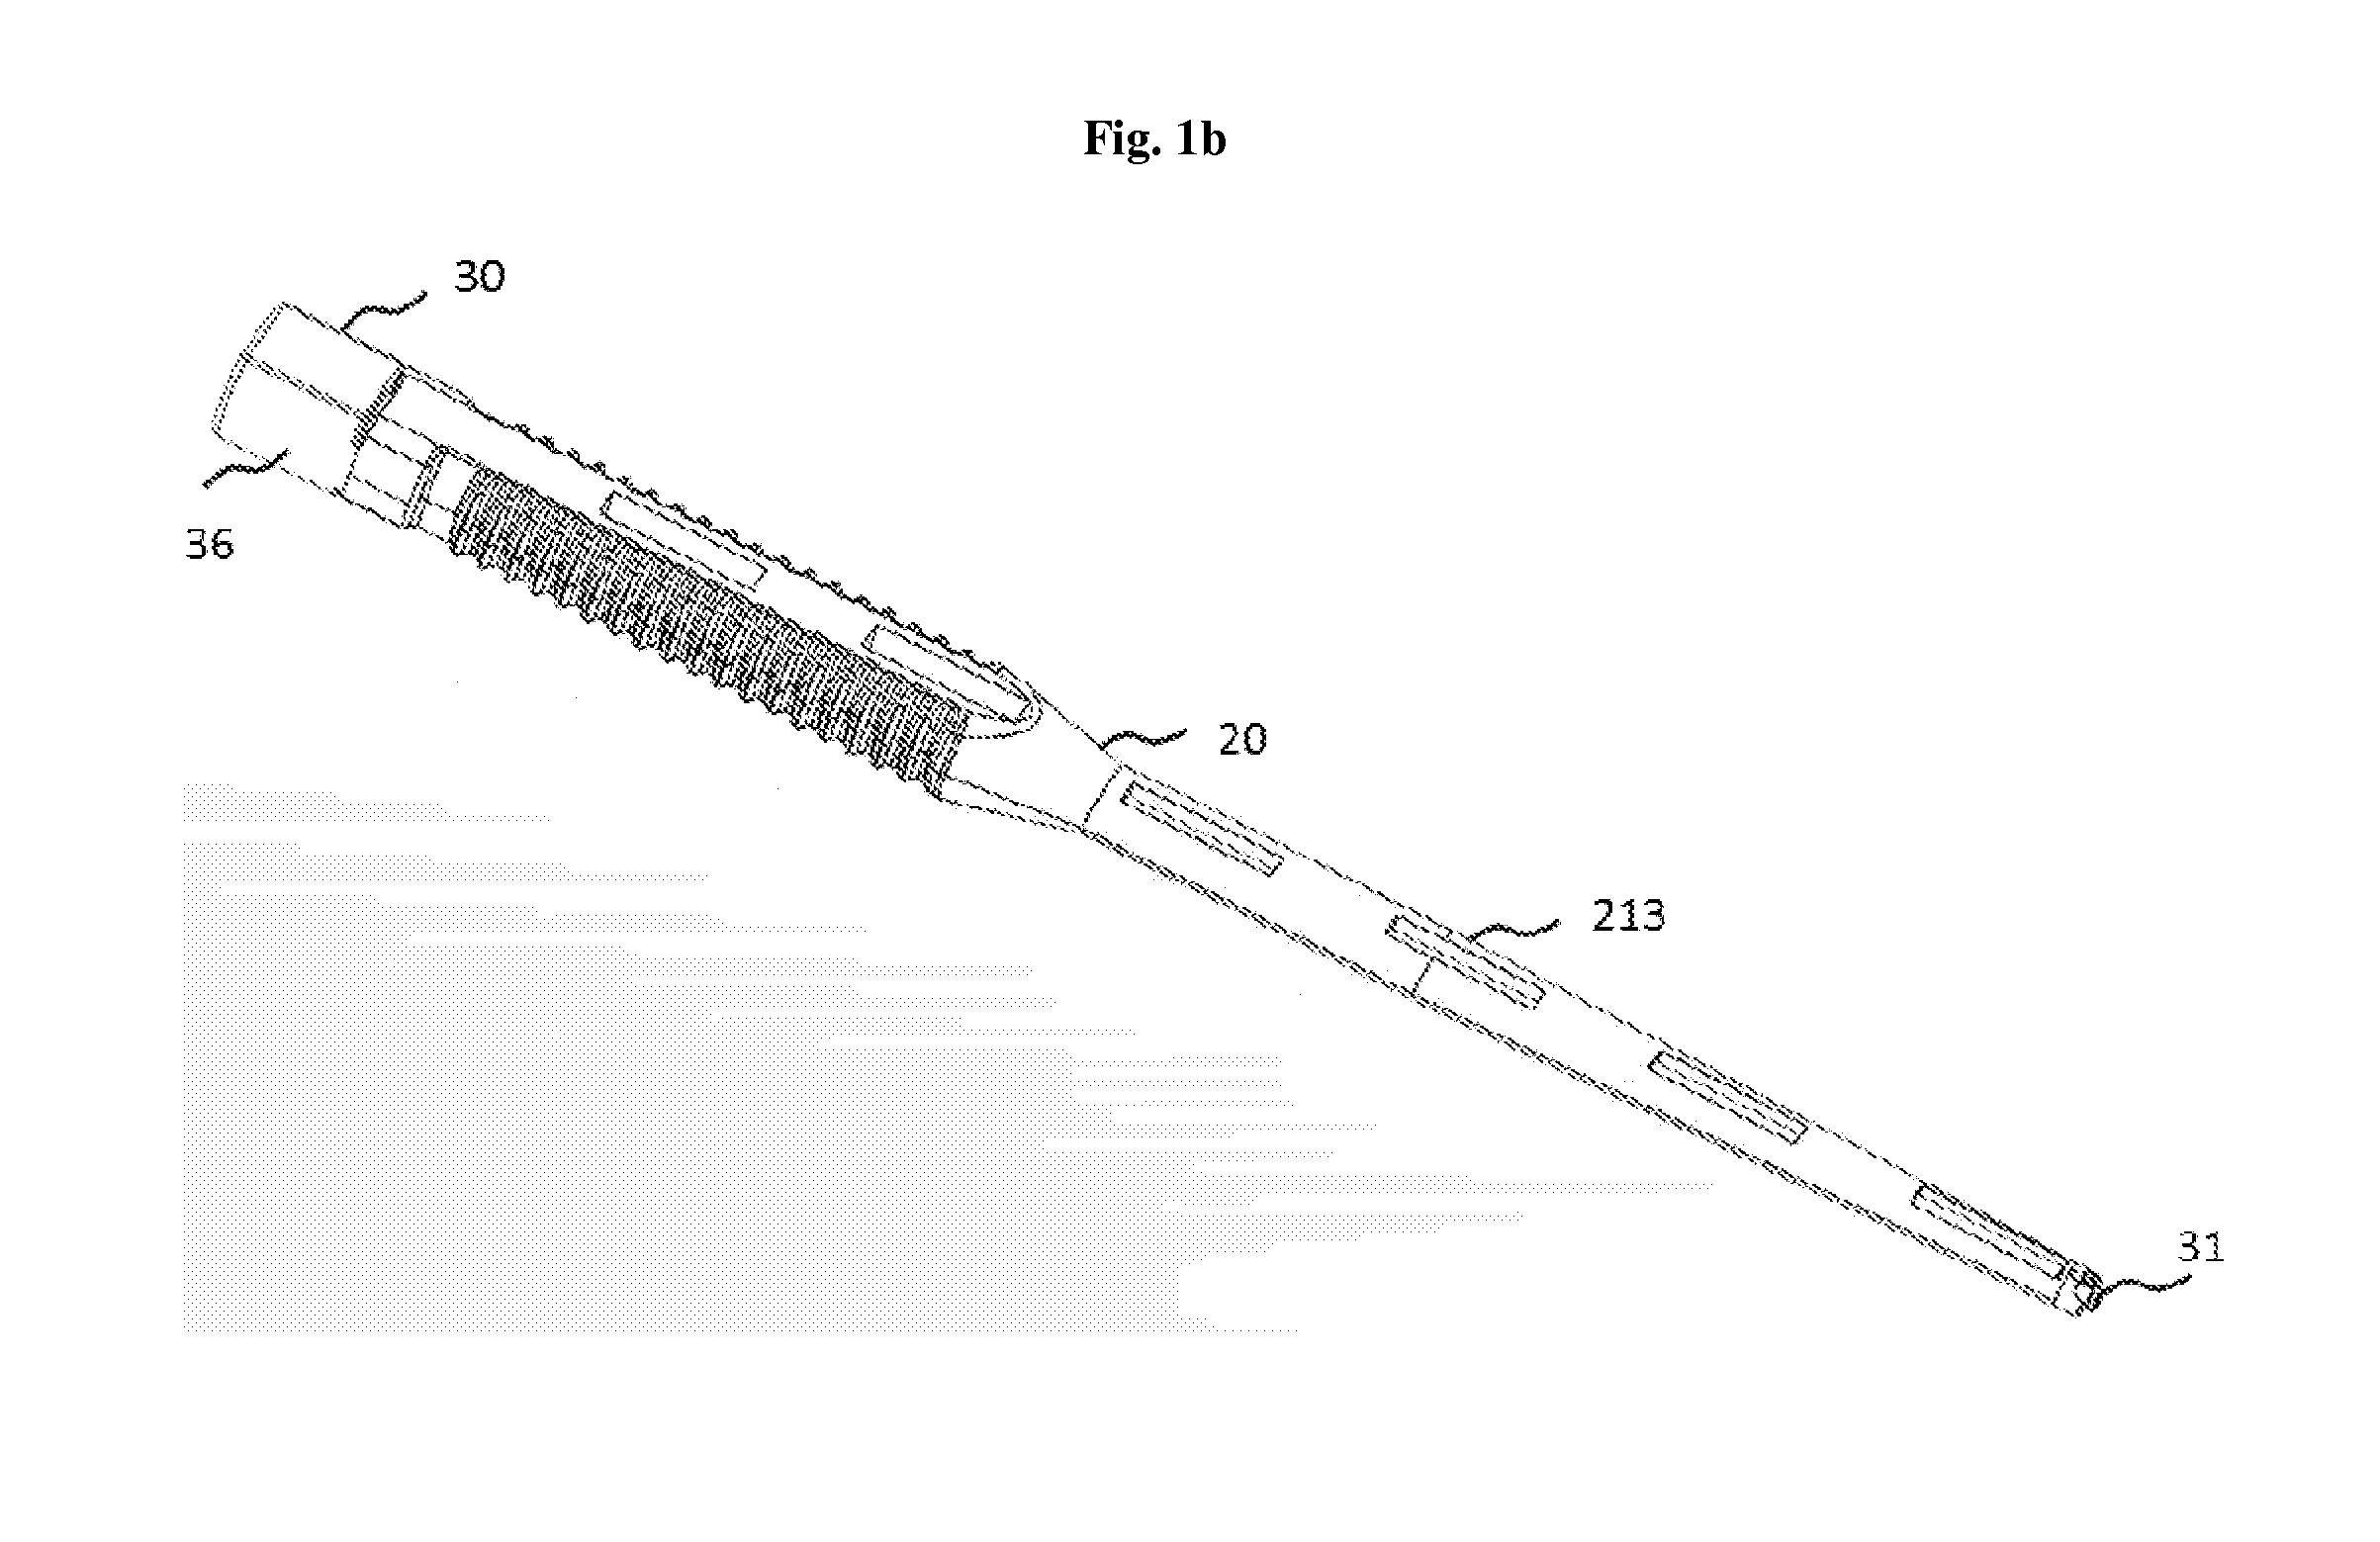 Lock and release implant delivery system